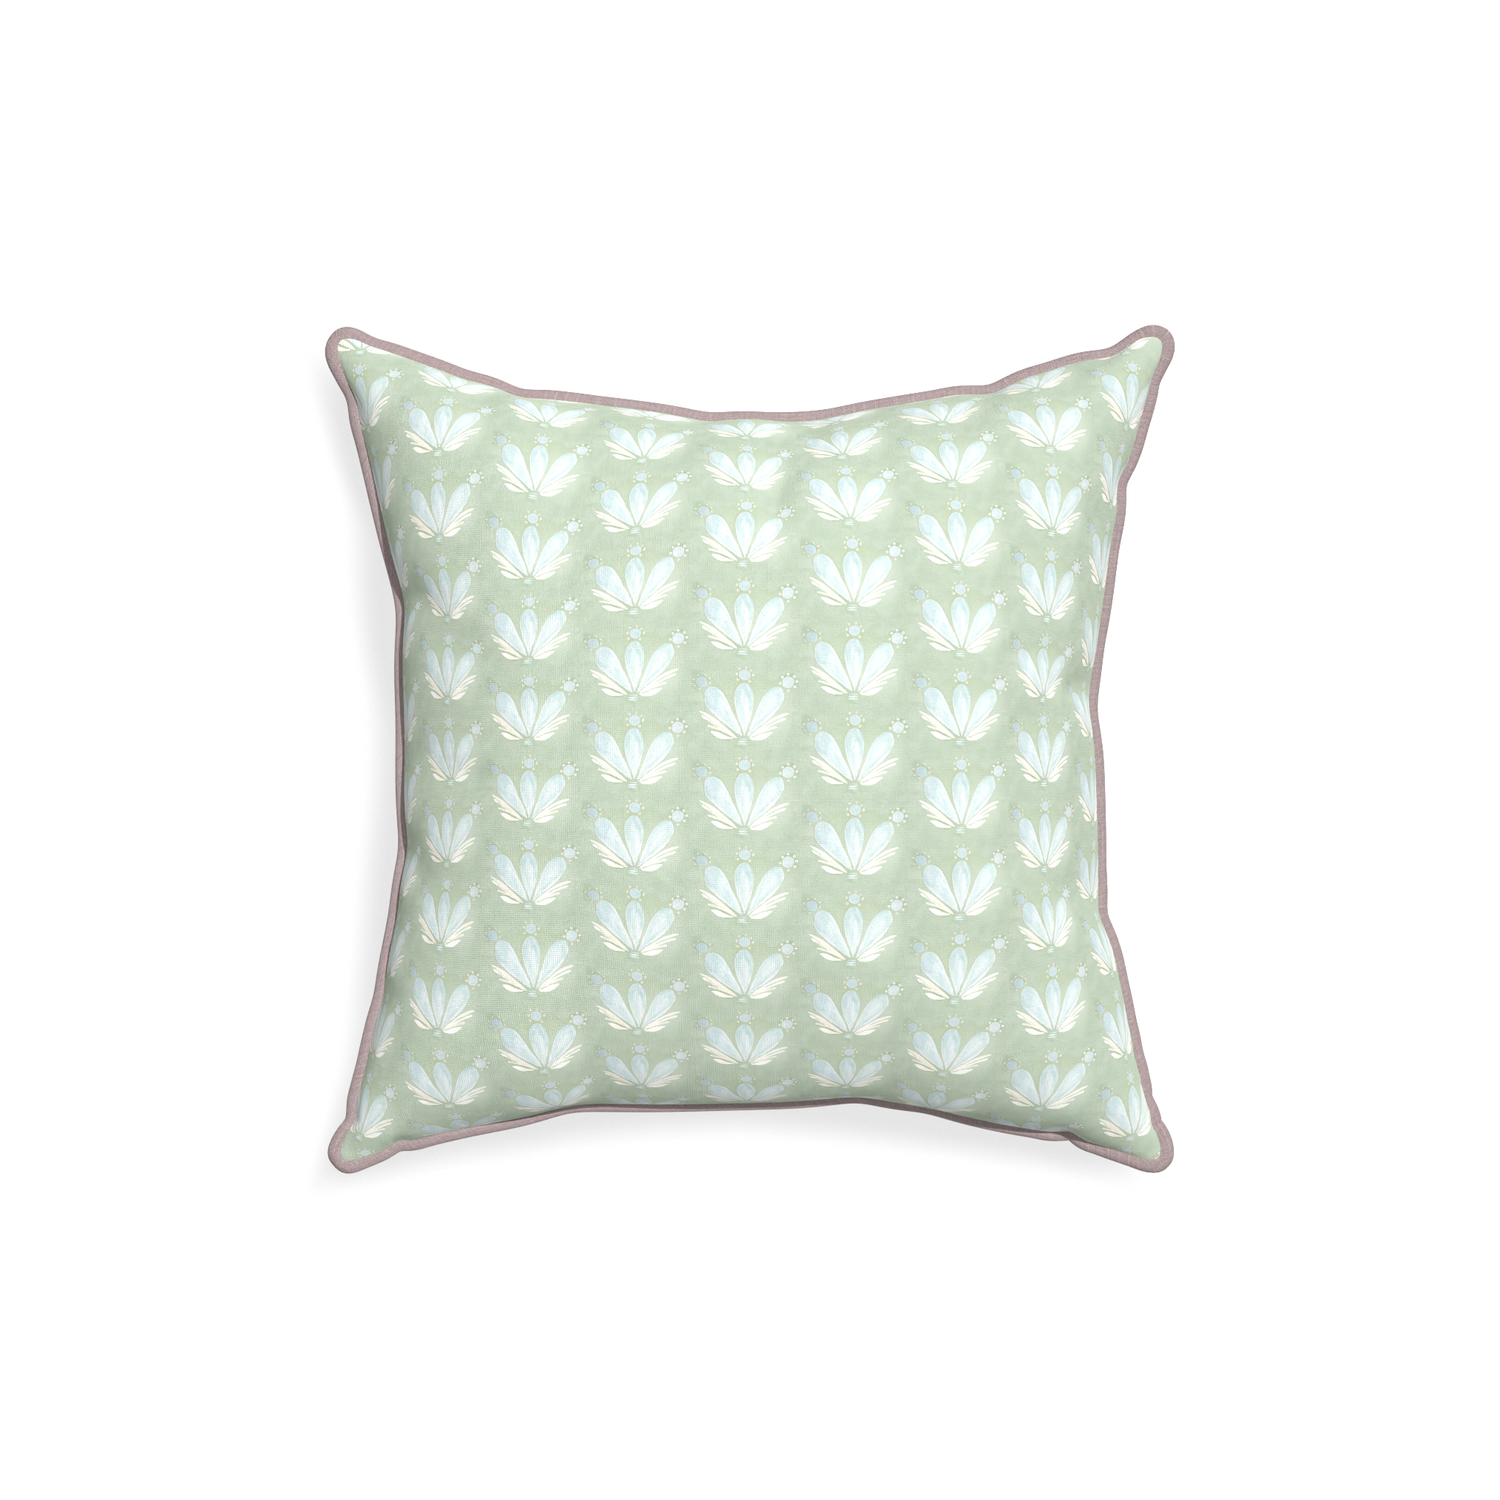 18-square serena sea salt custom blue & green floral drop repeatpillow with orchid piping on white background